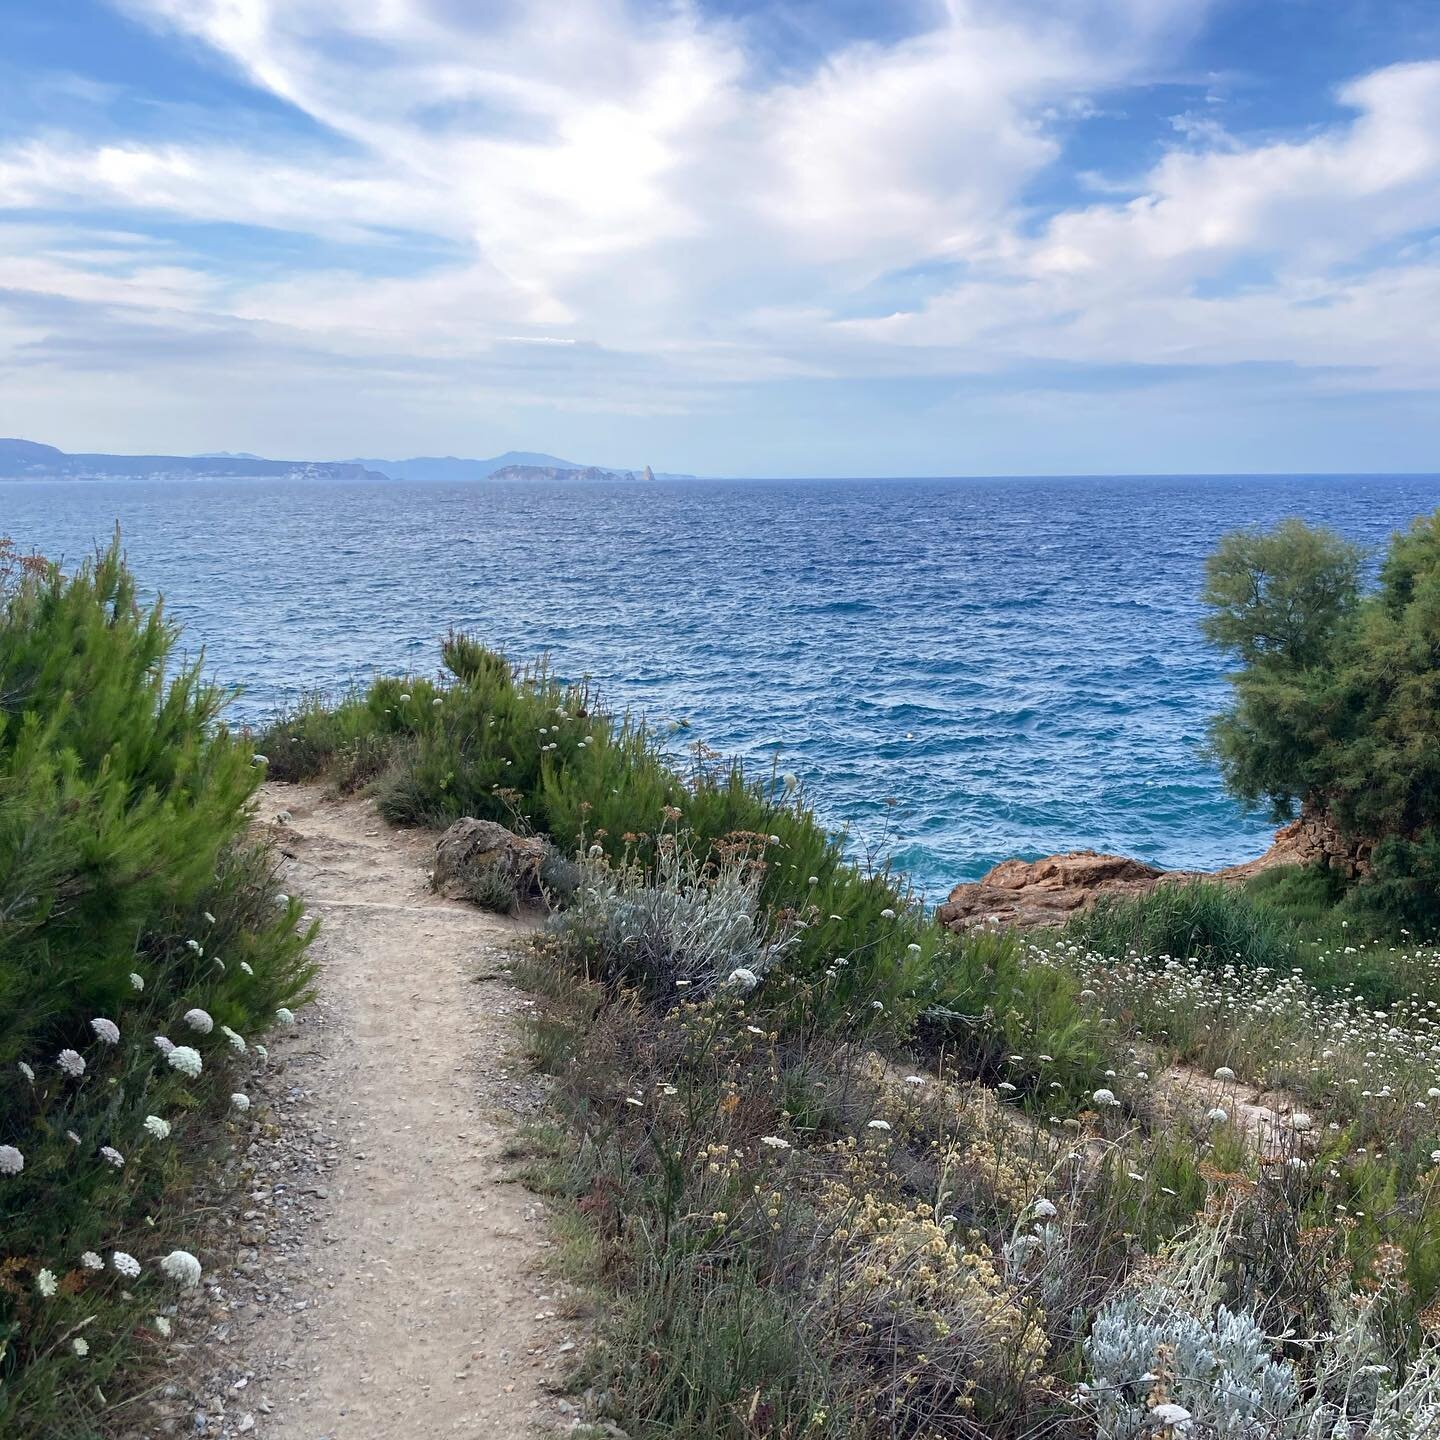 Walking along this little coastal path yesterday on a very windy evening felt like being transported to Cornwall (with Costa Brava temperatures)